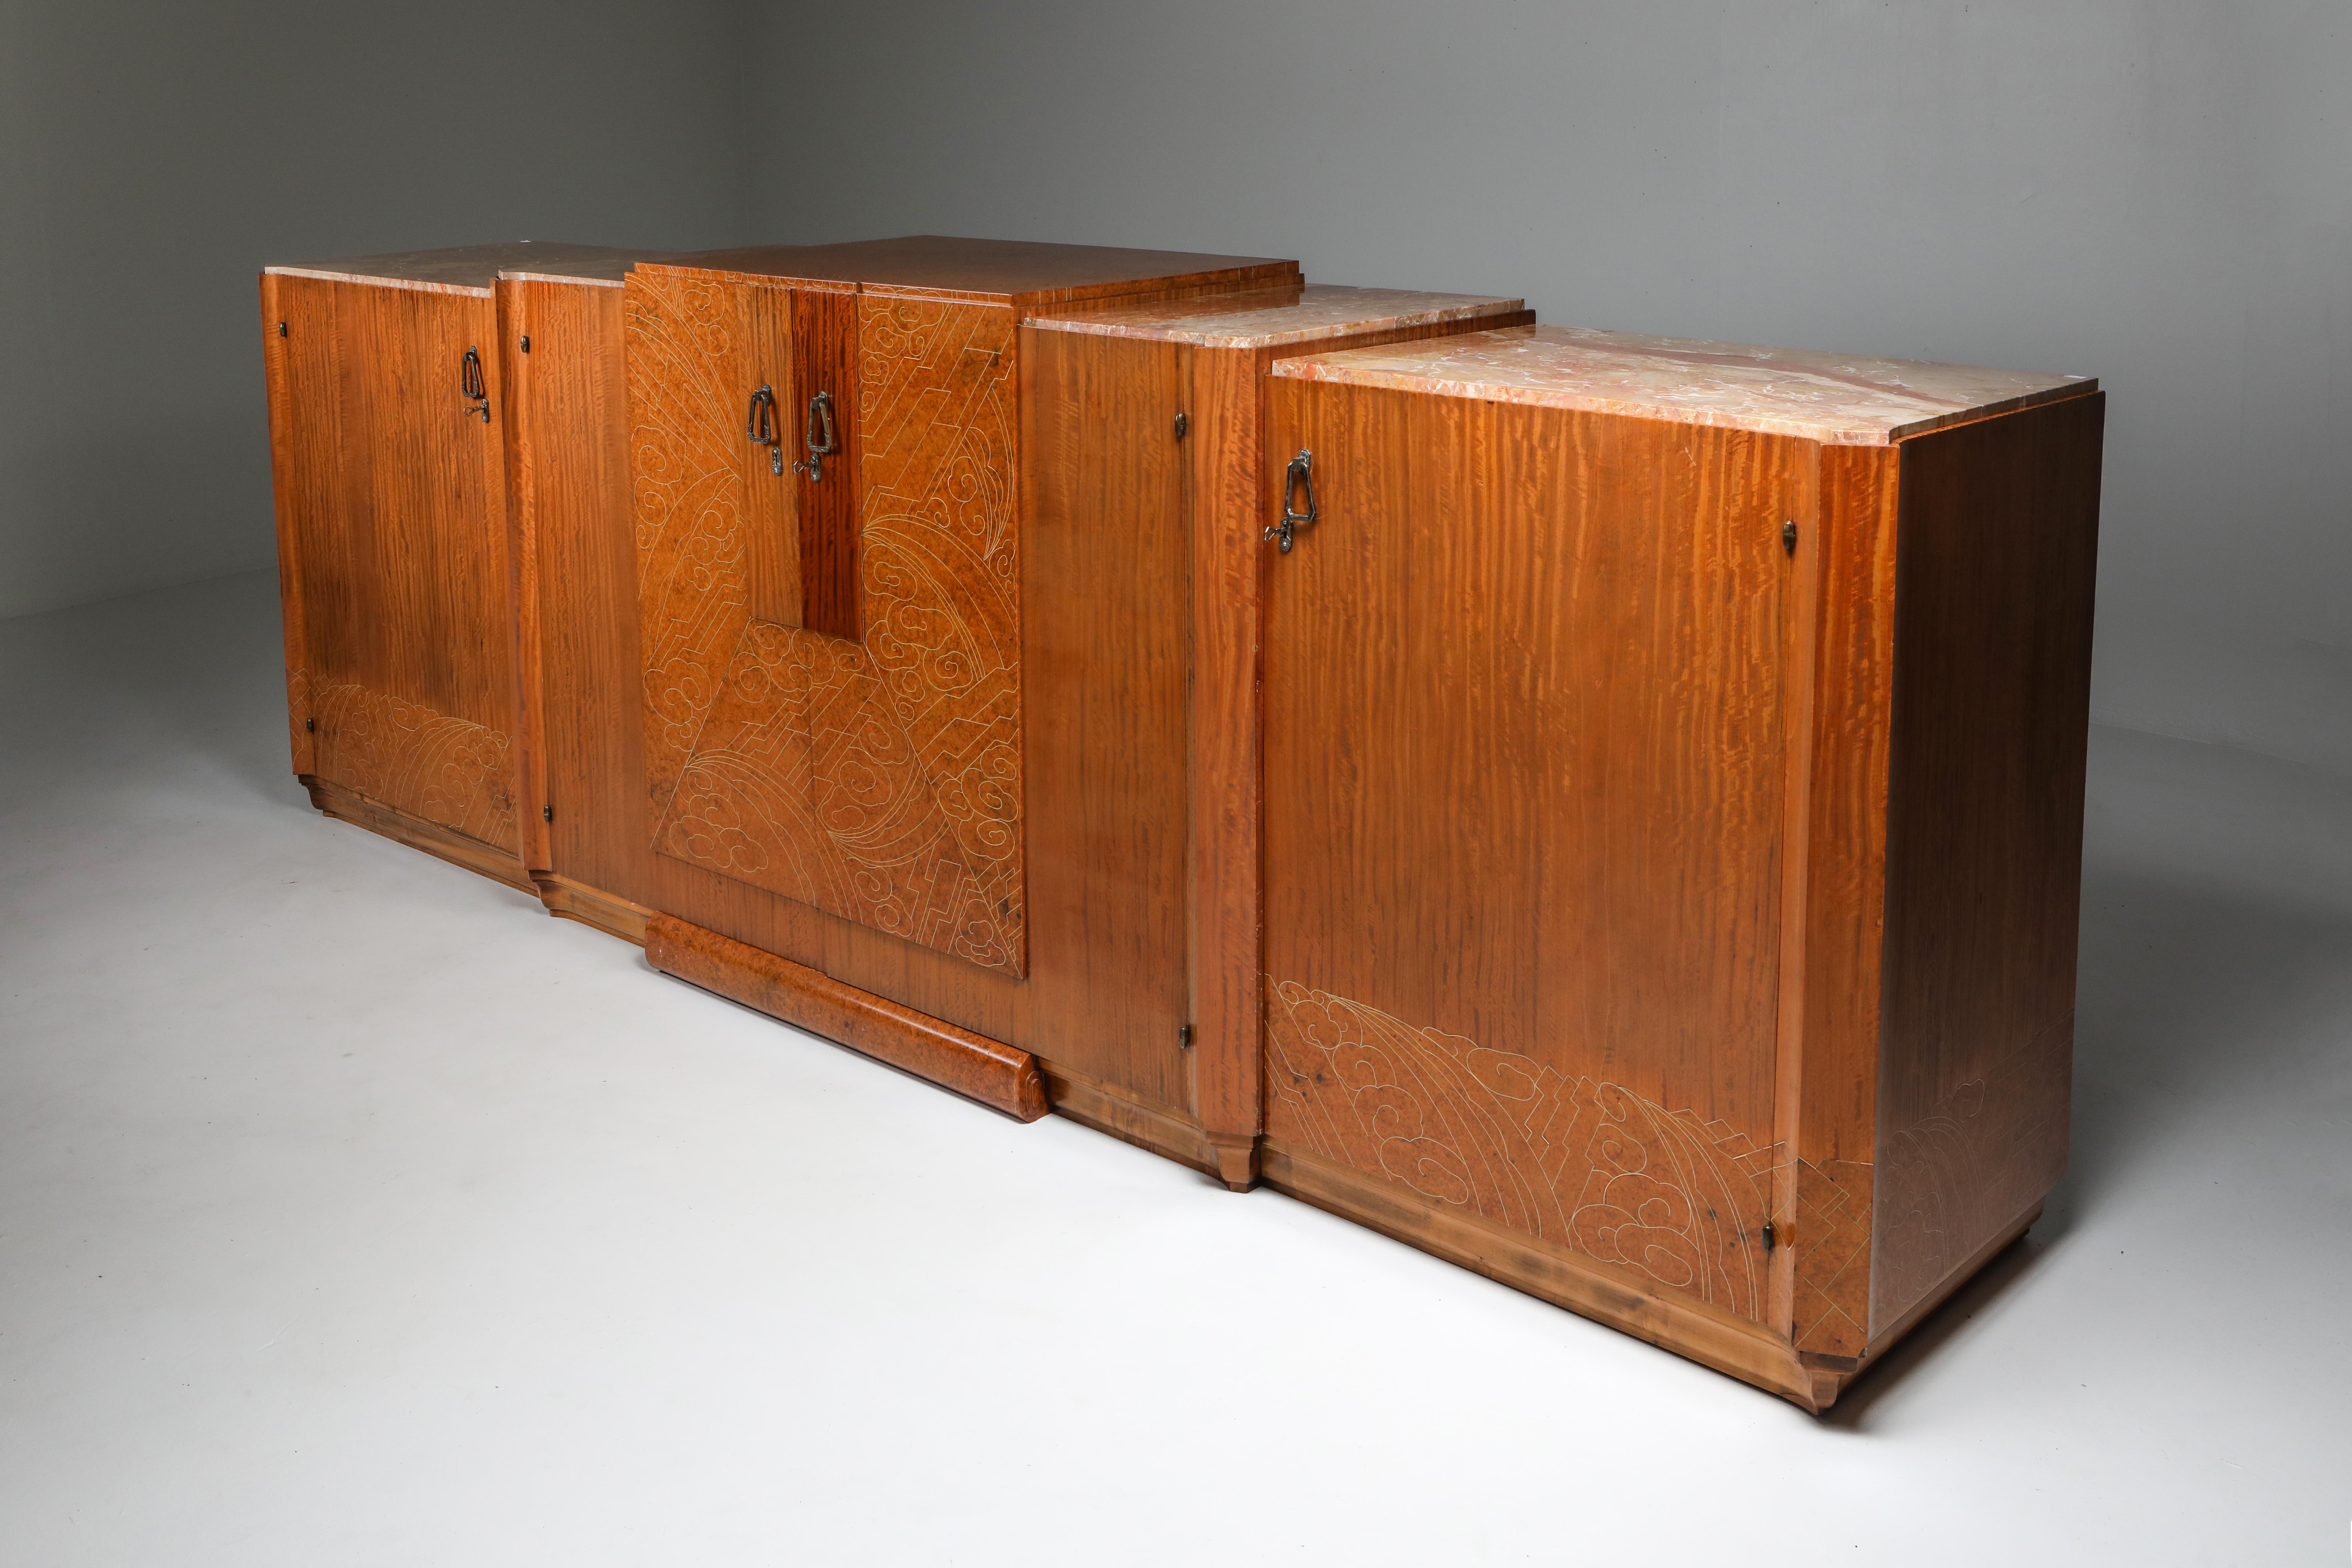 Art Deco High-End Credenza, Mahogany, Burl, Loupe D'amboine and Marble, 1930's For Sale 1